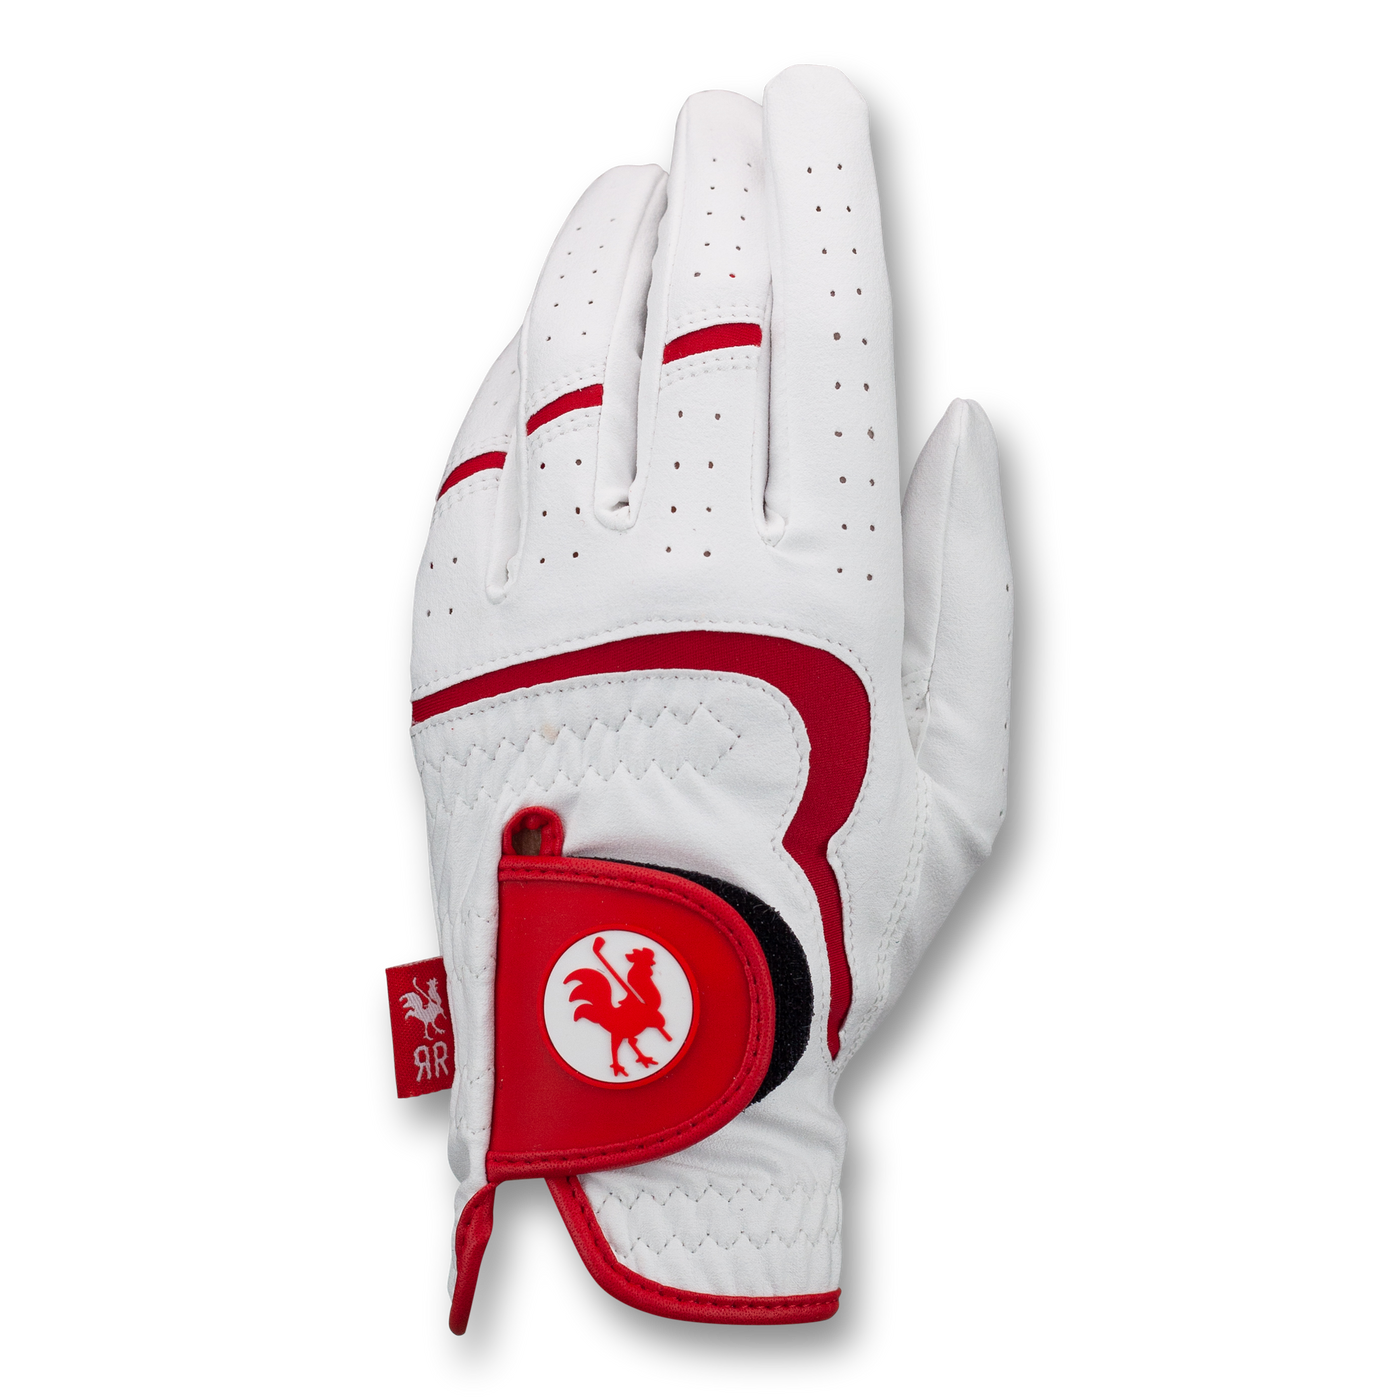 Women's Range Rooster left hand golf glove outer view